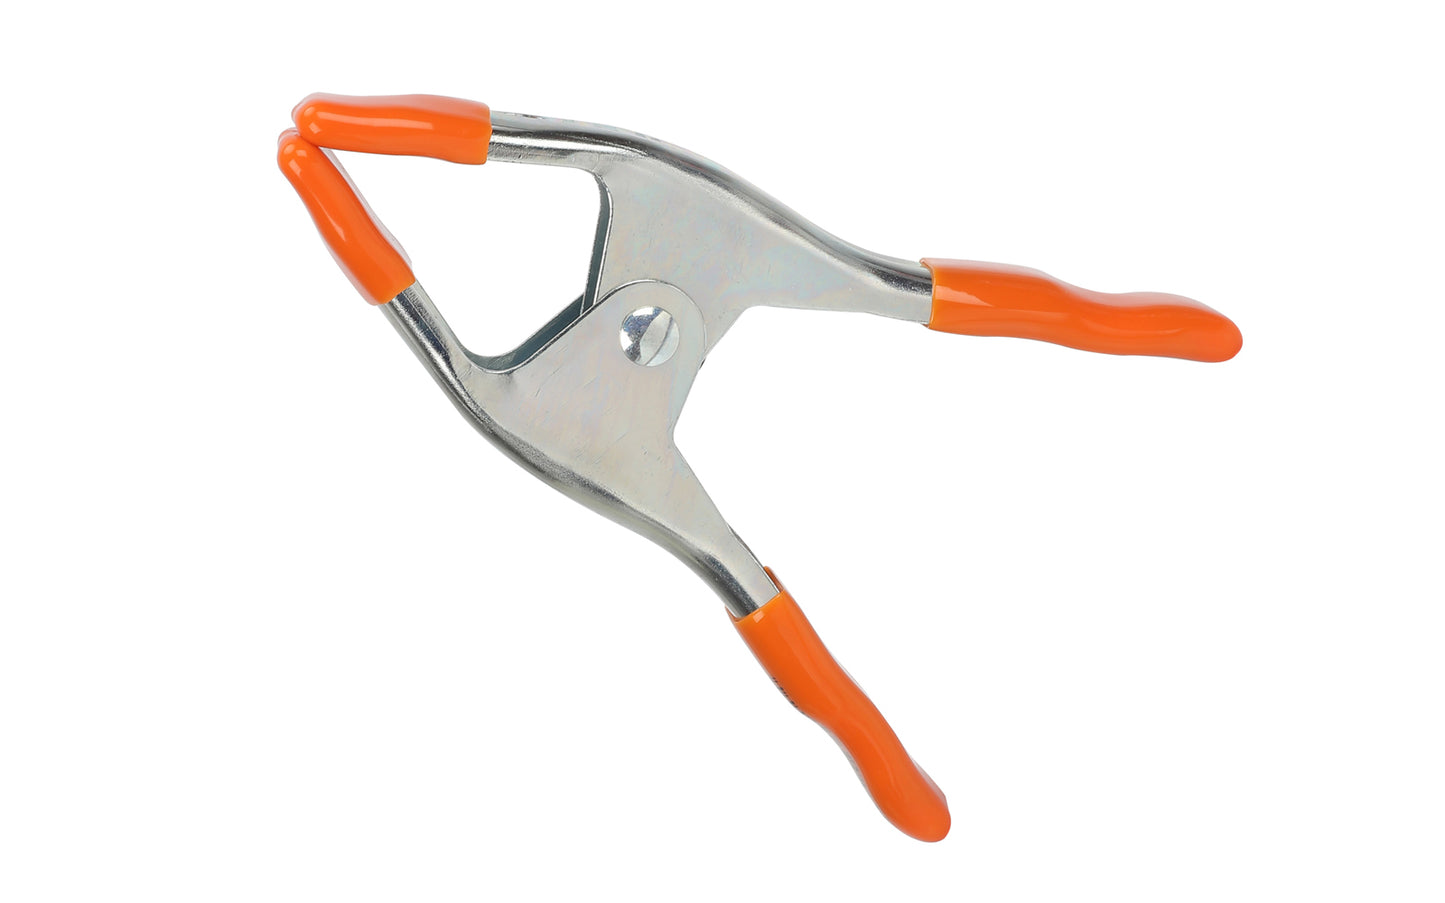 Pony 2" Opening Classic Spring Clamp ~ No. 3202-HT - With protected poly-vinyl handles & tips - Pony / Jorgensen - poly-vinyl protected handles & jaw tips mean you can use them on metal, wood, plastic, fabric - 2" max opening - Steel Spring Clamp ~ 044295320269